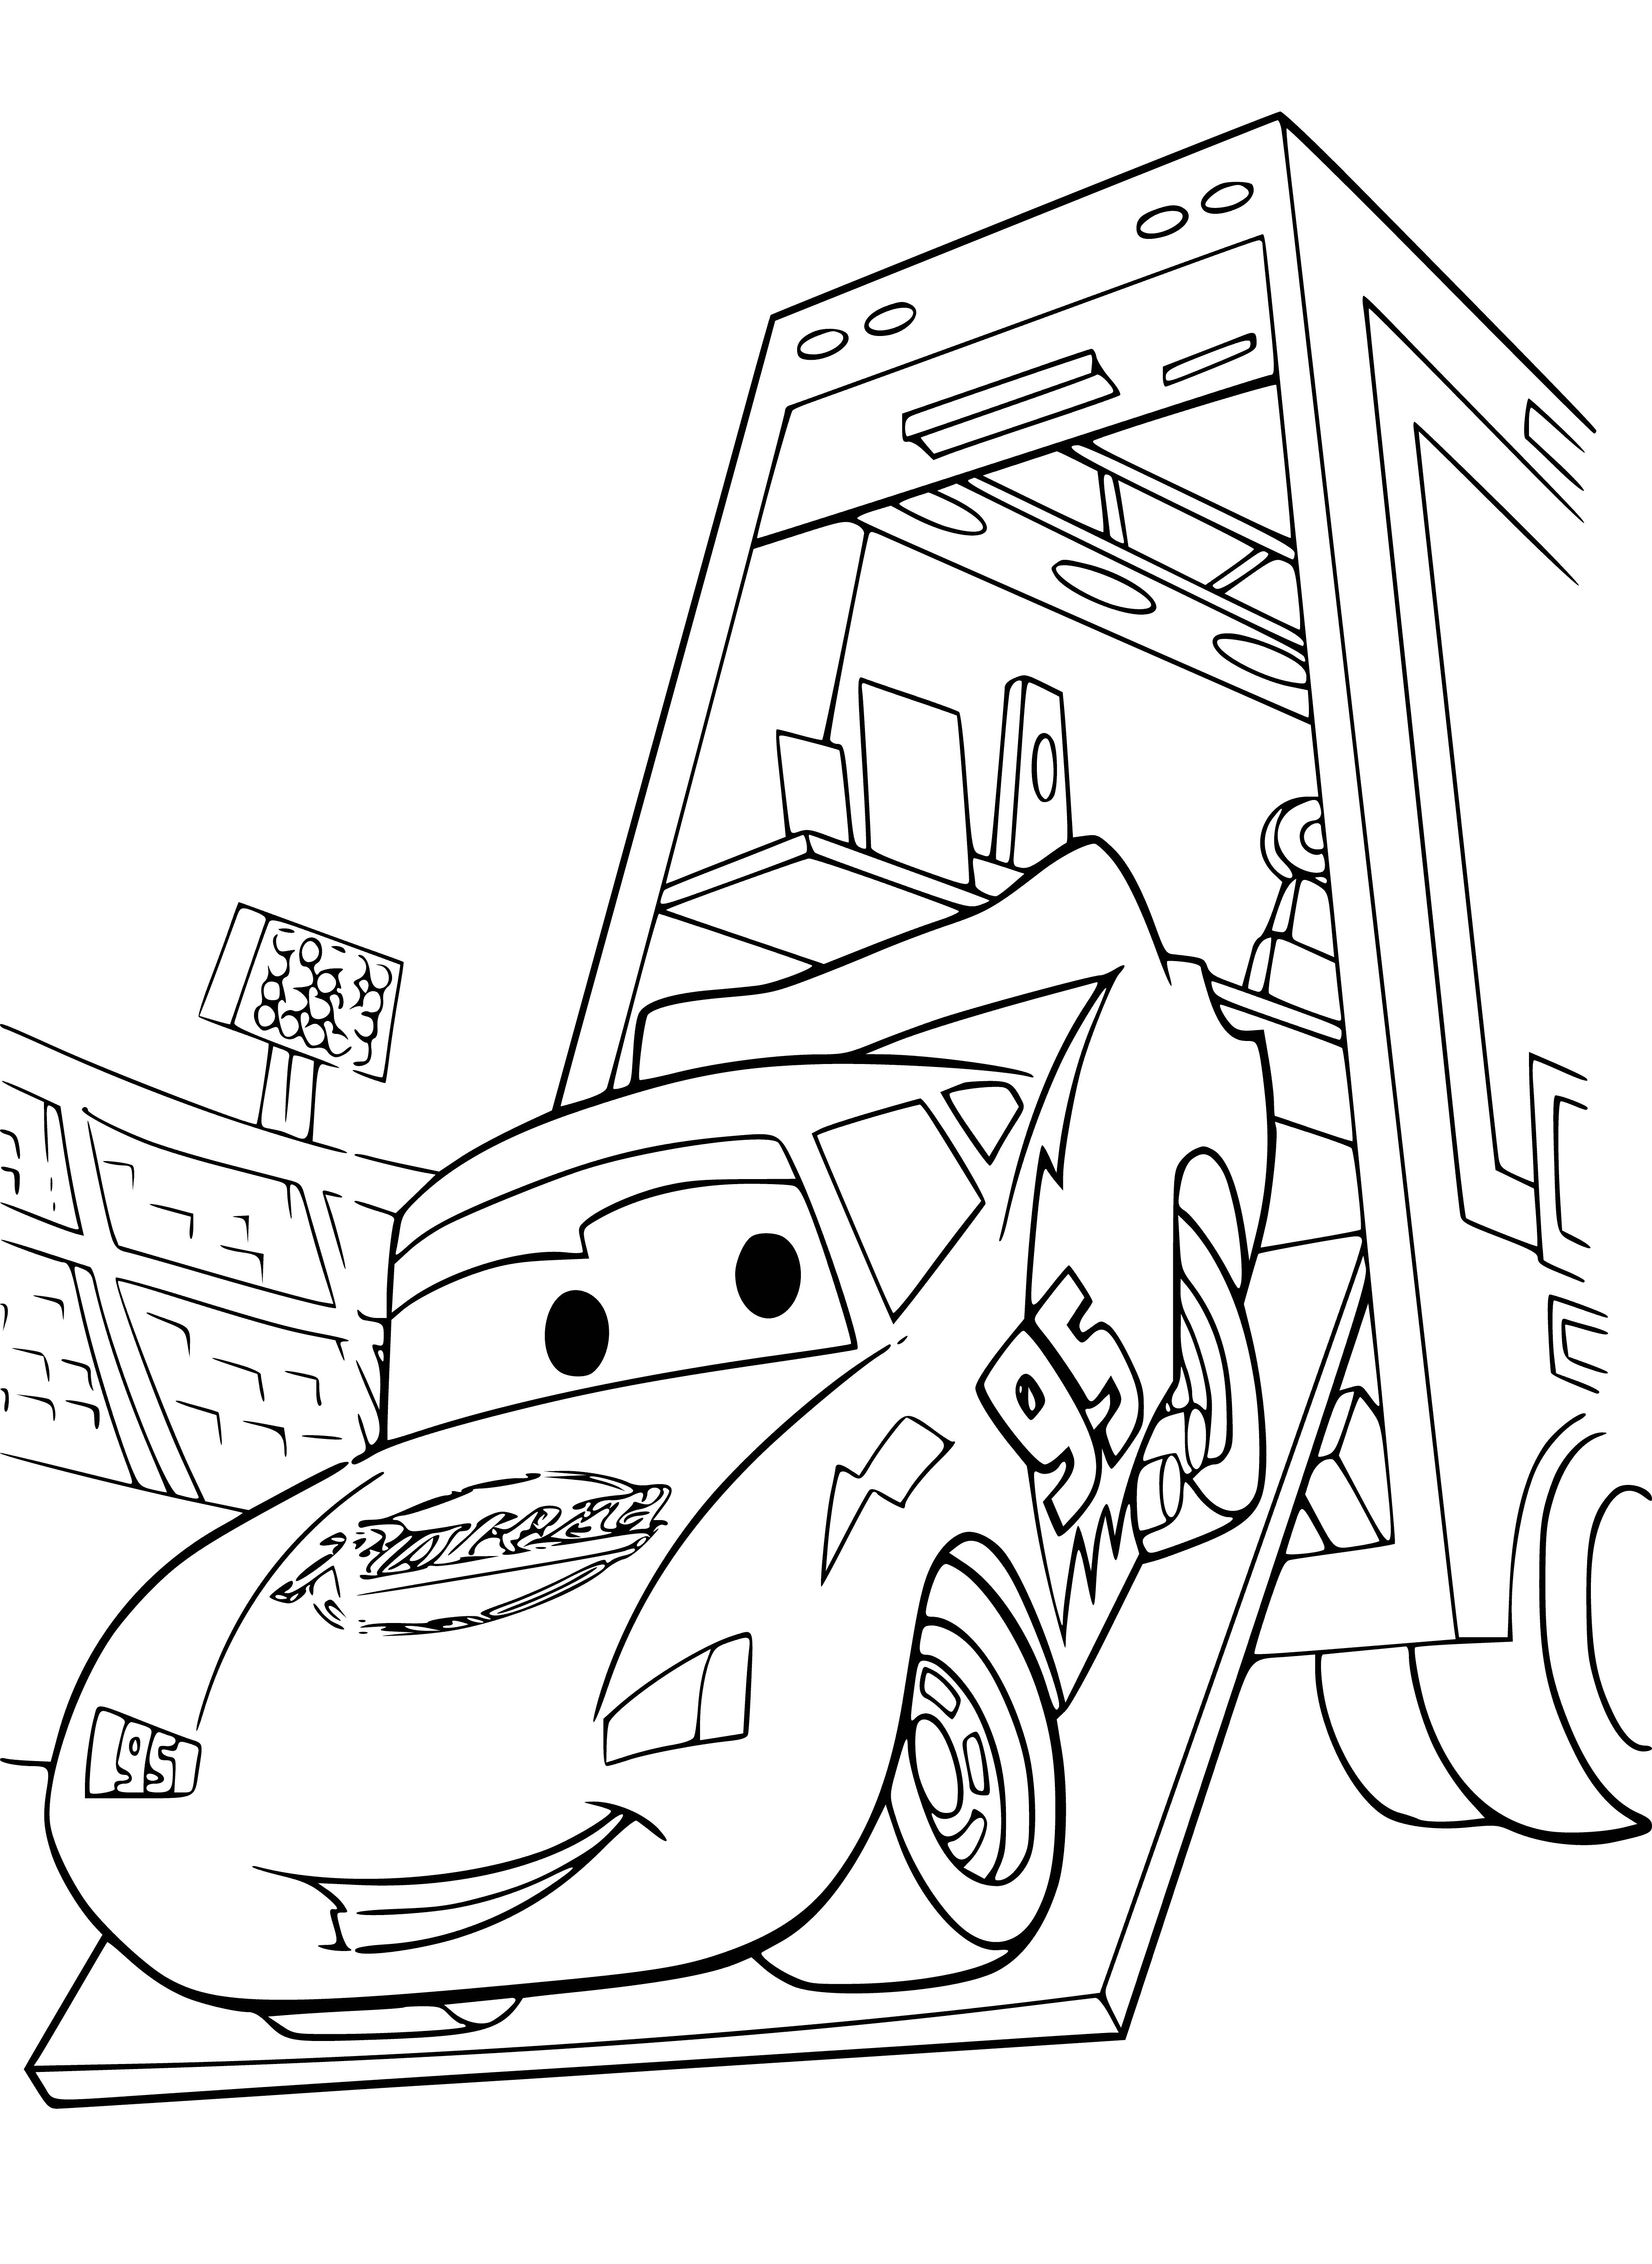 coloring page: He loves racing and dreams of being the best.

Lightning McQueen is an ambitious car who loves to race, determined to be the best.